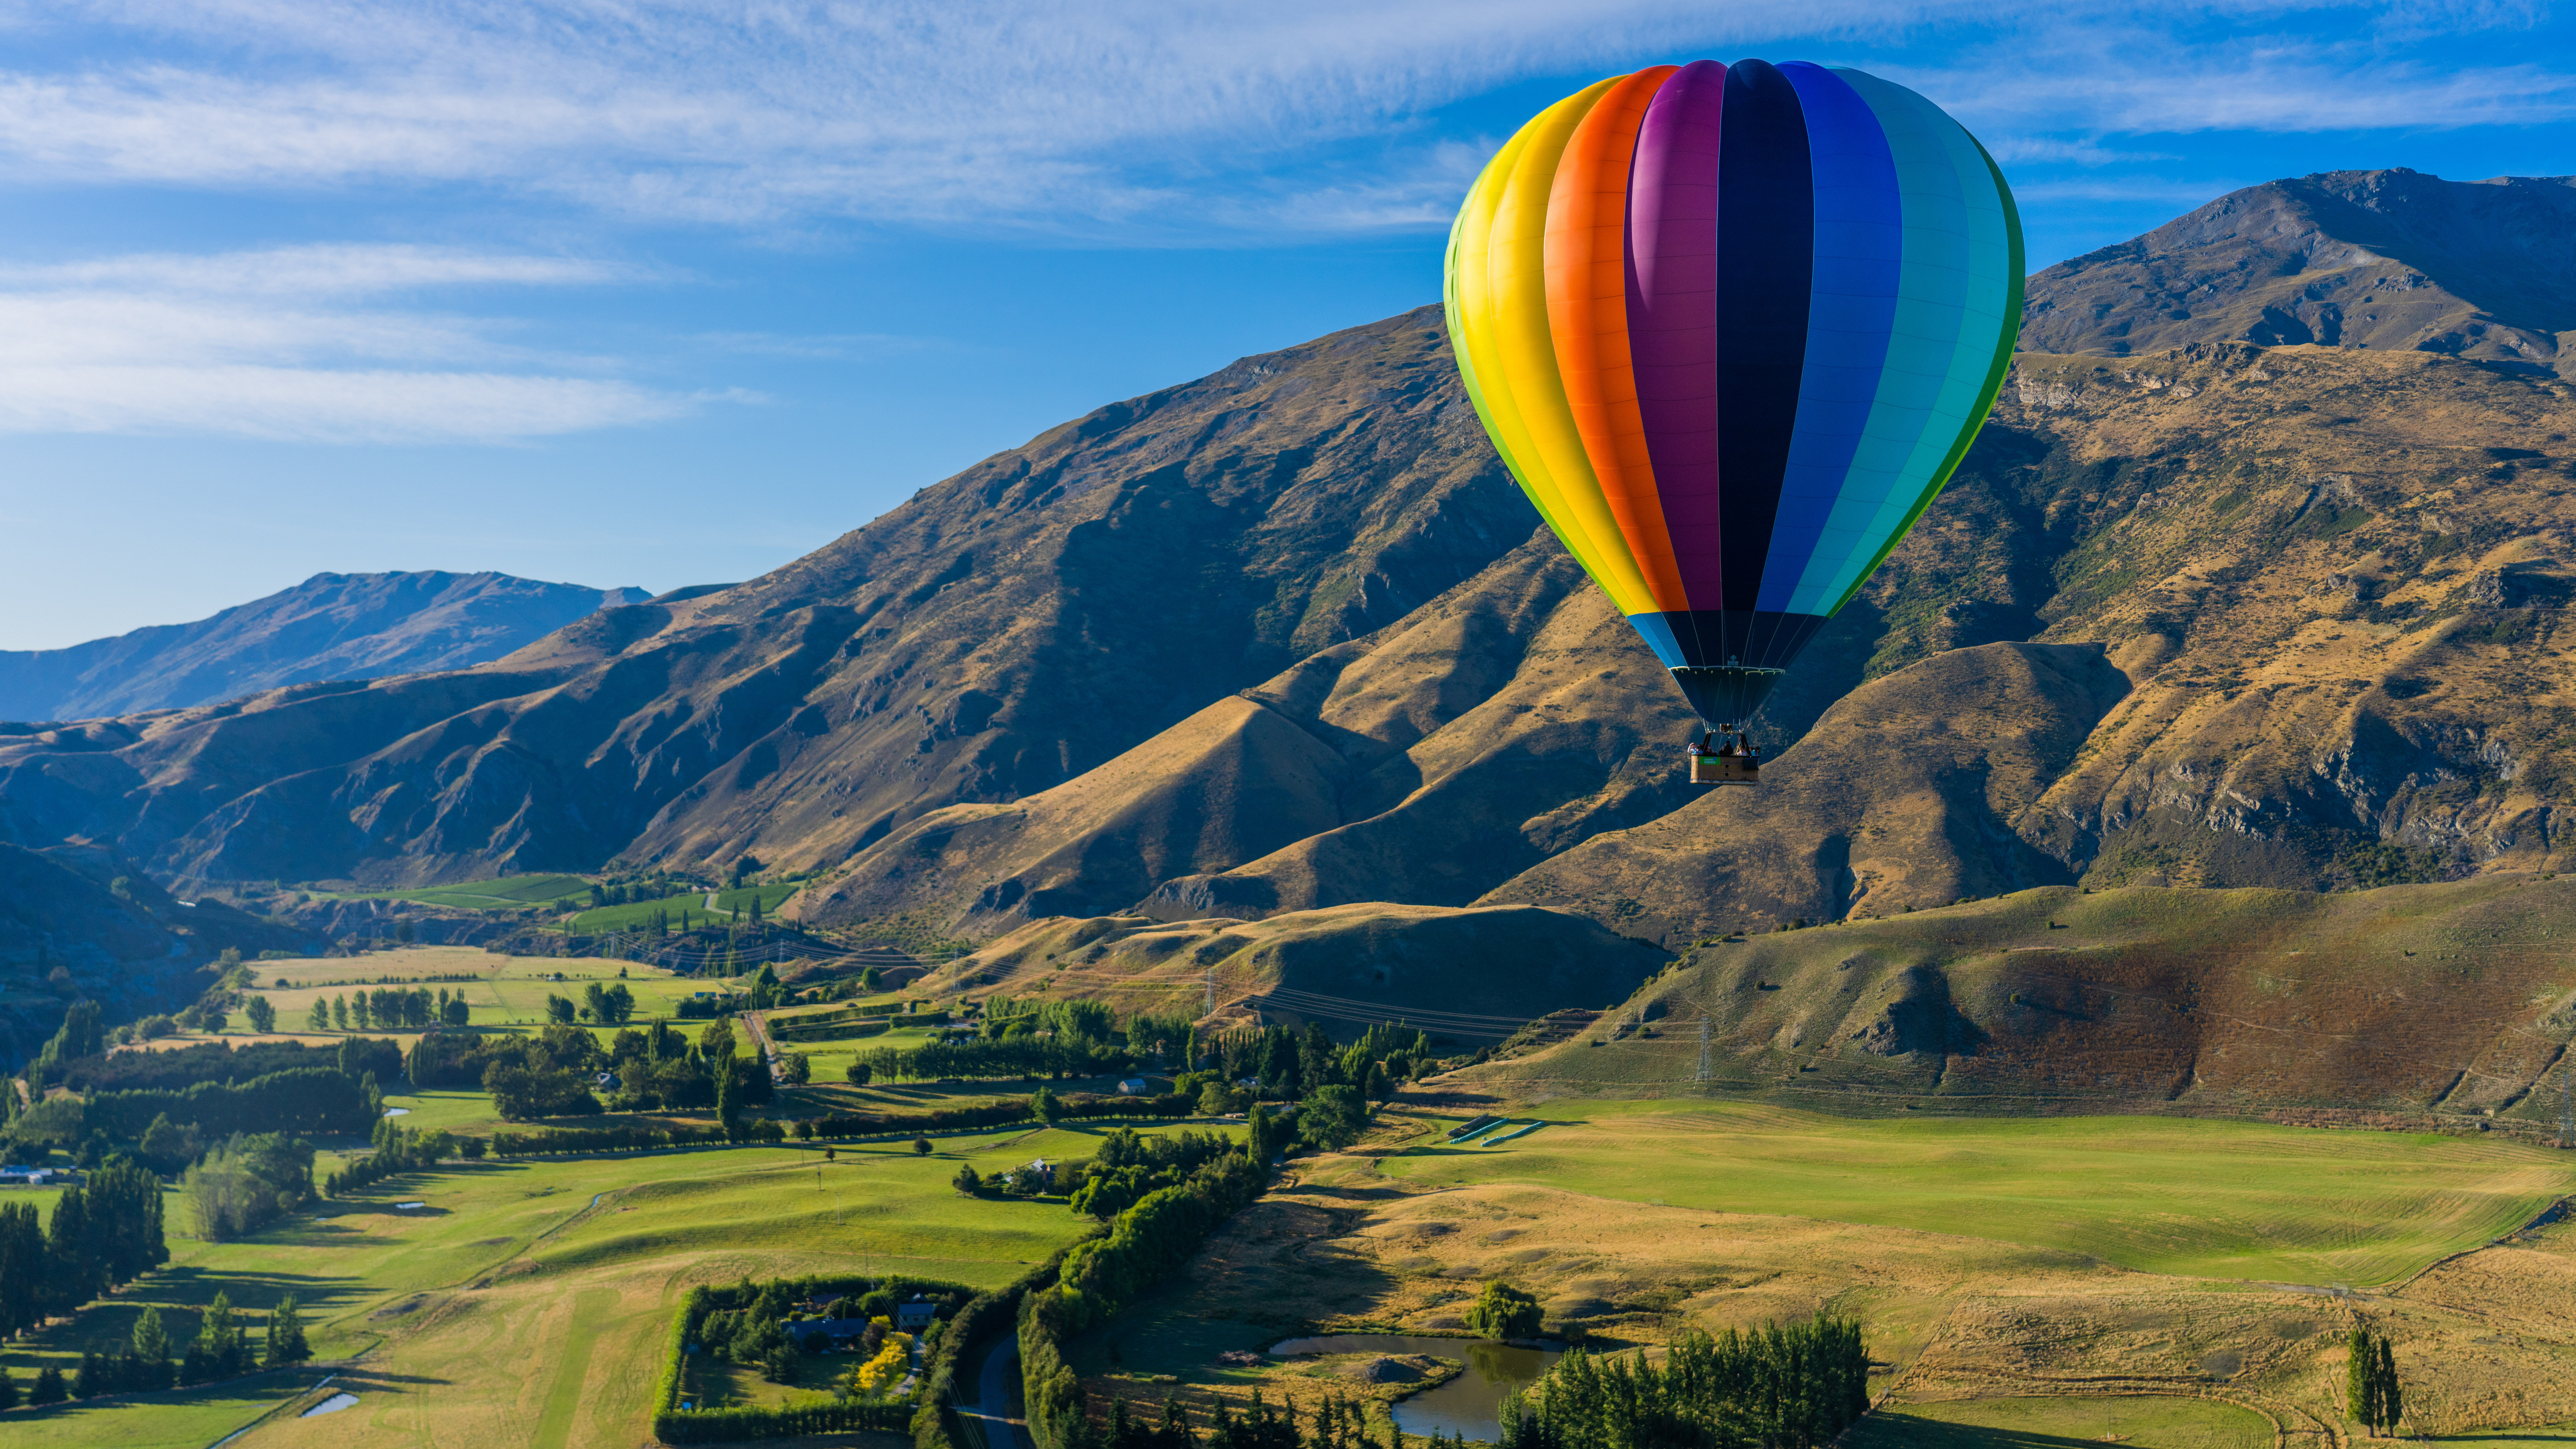 General 7680x4320 Trey Ratcliff photography New Zealand Queenstown balloon mountains landscape trees